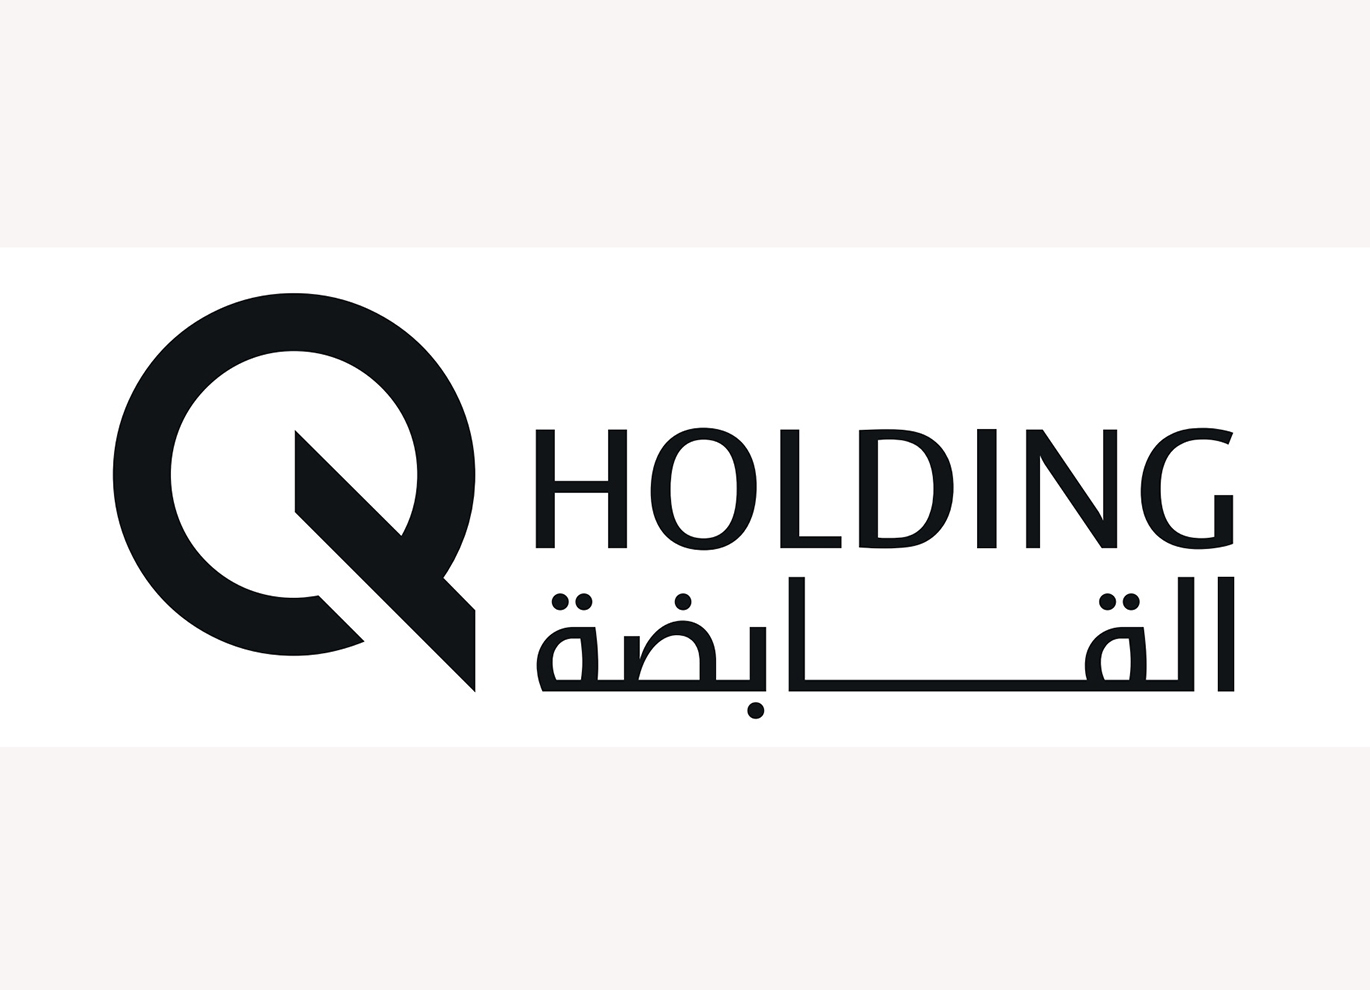 Q Holding launches as prominent force in global economic